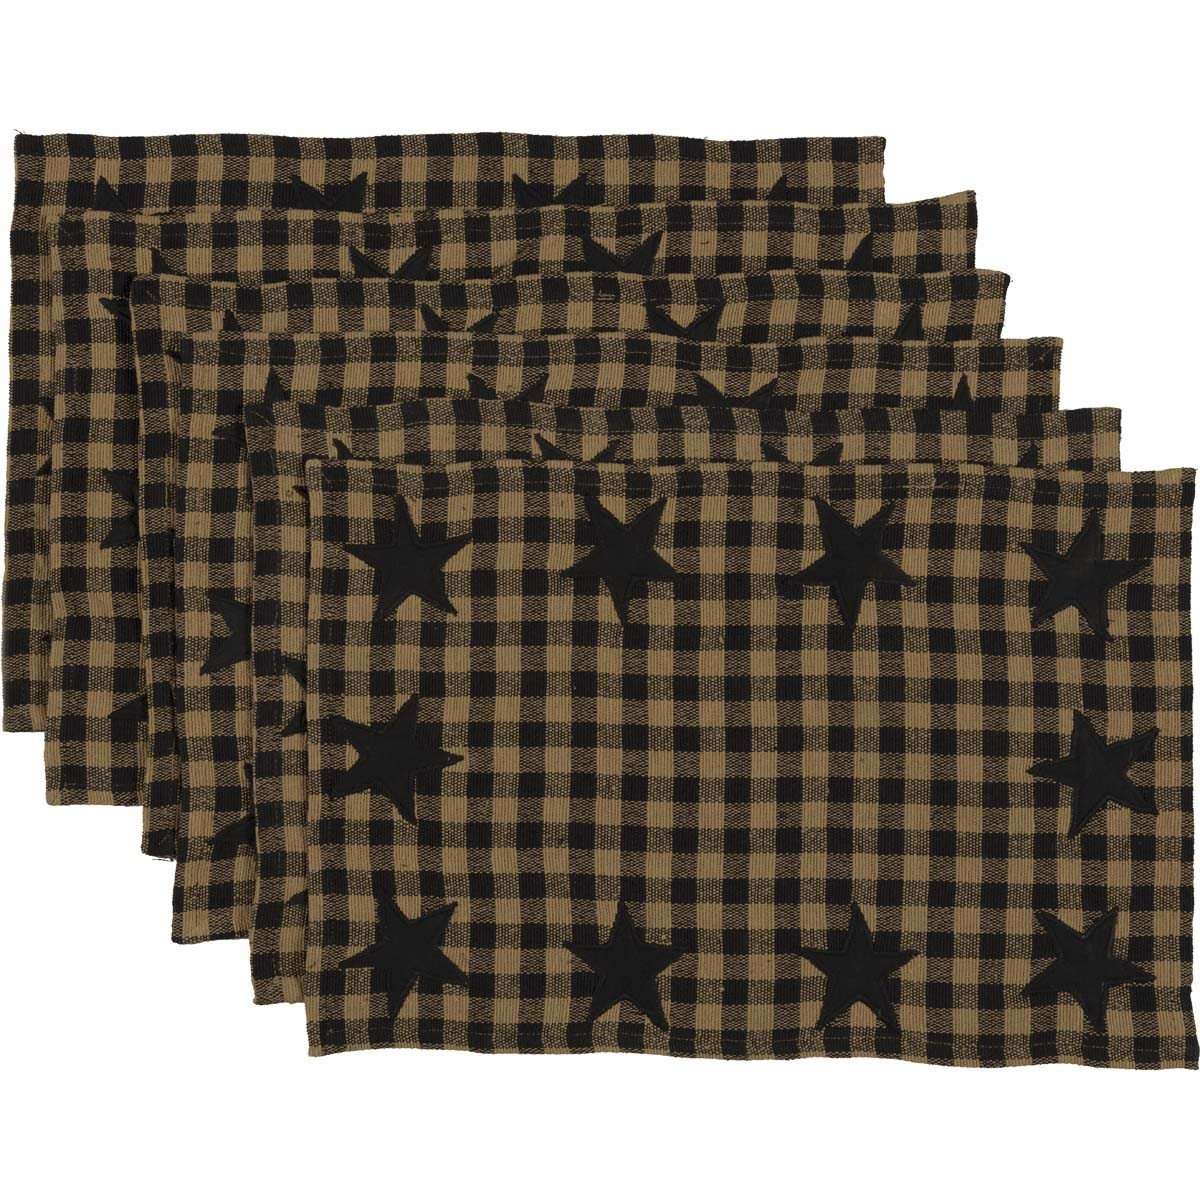 Black Star Placemat Set of 6 - The Fox Decor